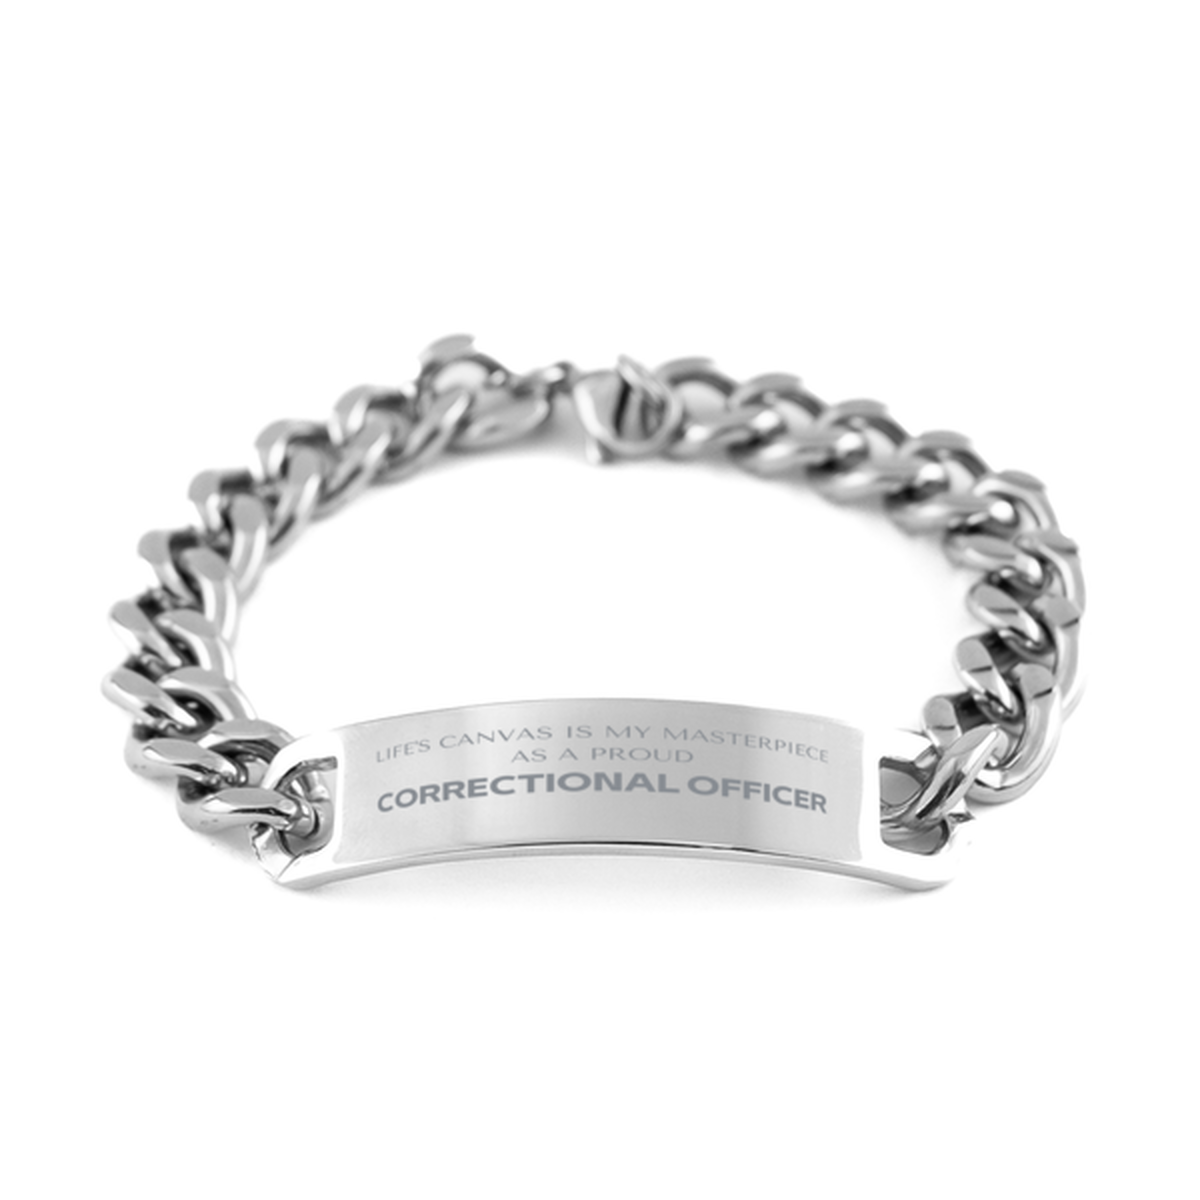 Proud Correctional Officer Gifts, Life's canvas is my masterpiece, Epic Birthday Christmas Unique Cuban Chain Stainless Steel Bracelet For Correctional Officer, Coworkers, Men, Women, Friends